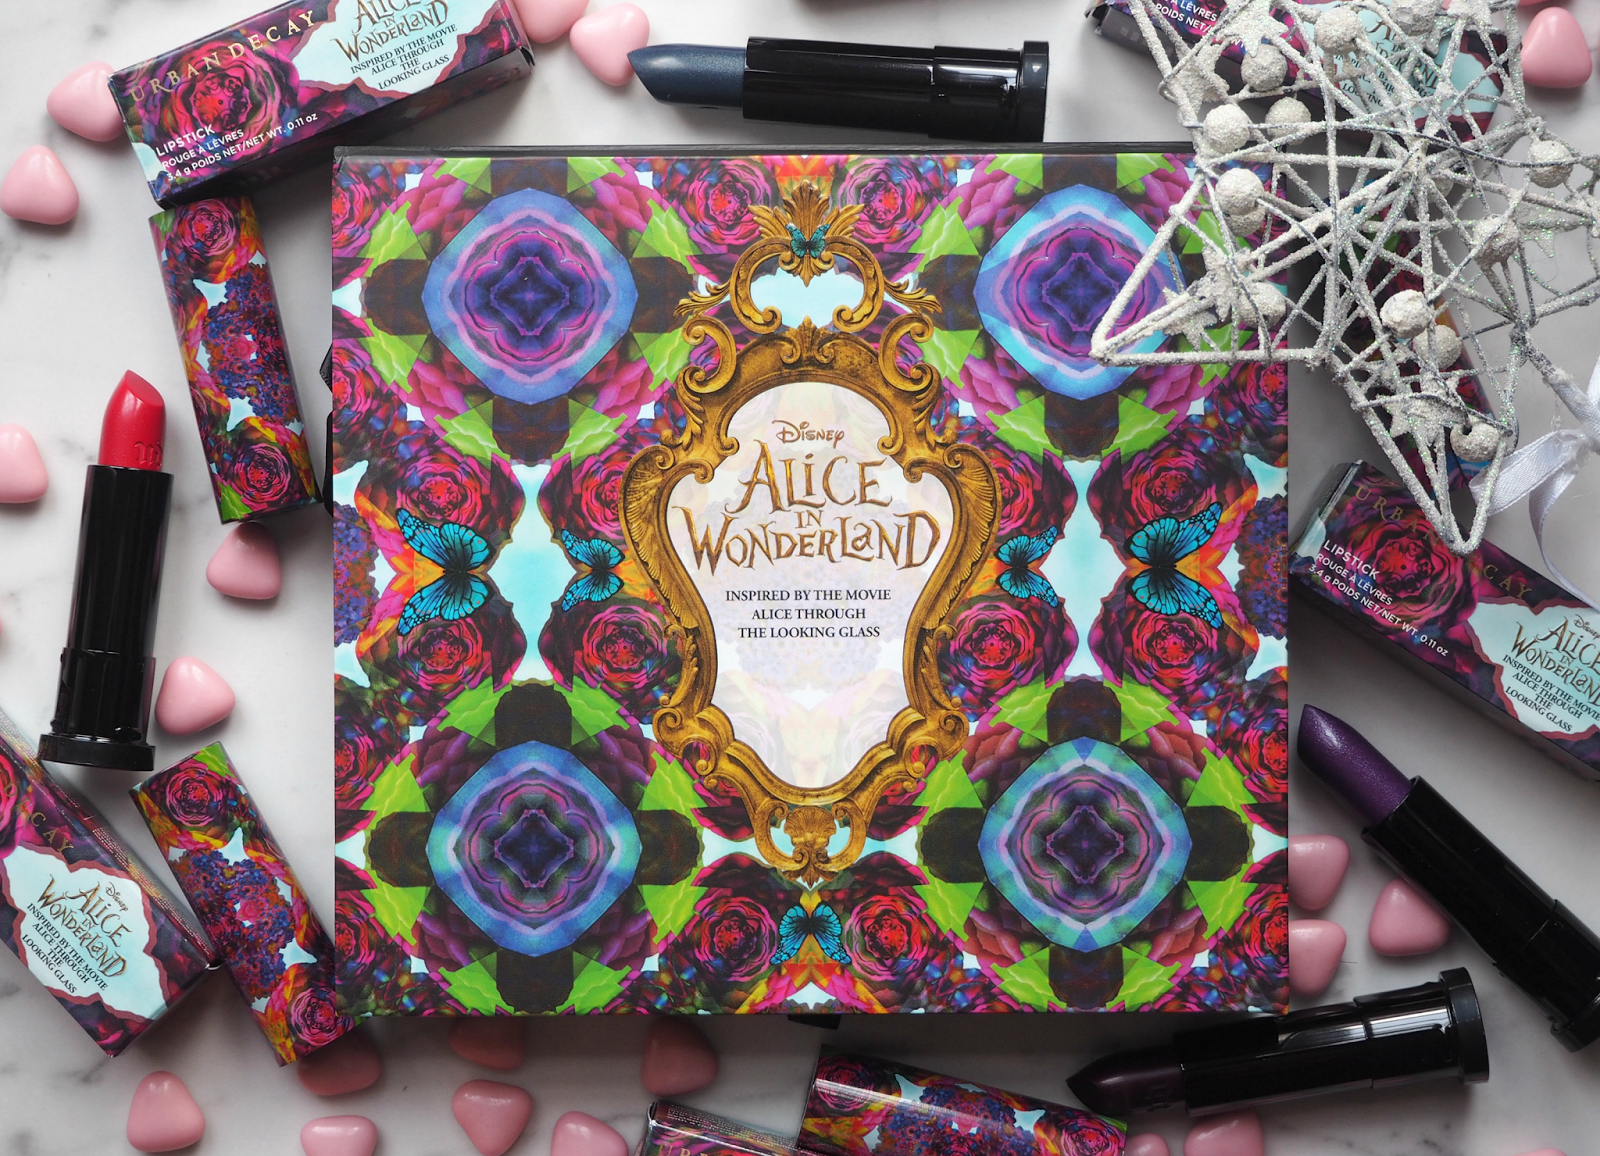 The Perfect Un-Birthday Present: Urban Decay Meets Alice In Wonderland For A Very Special Collection